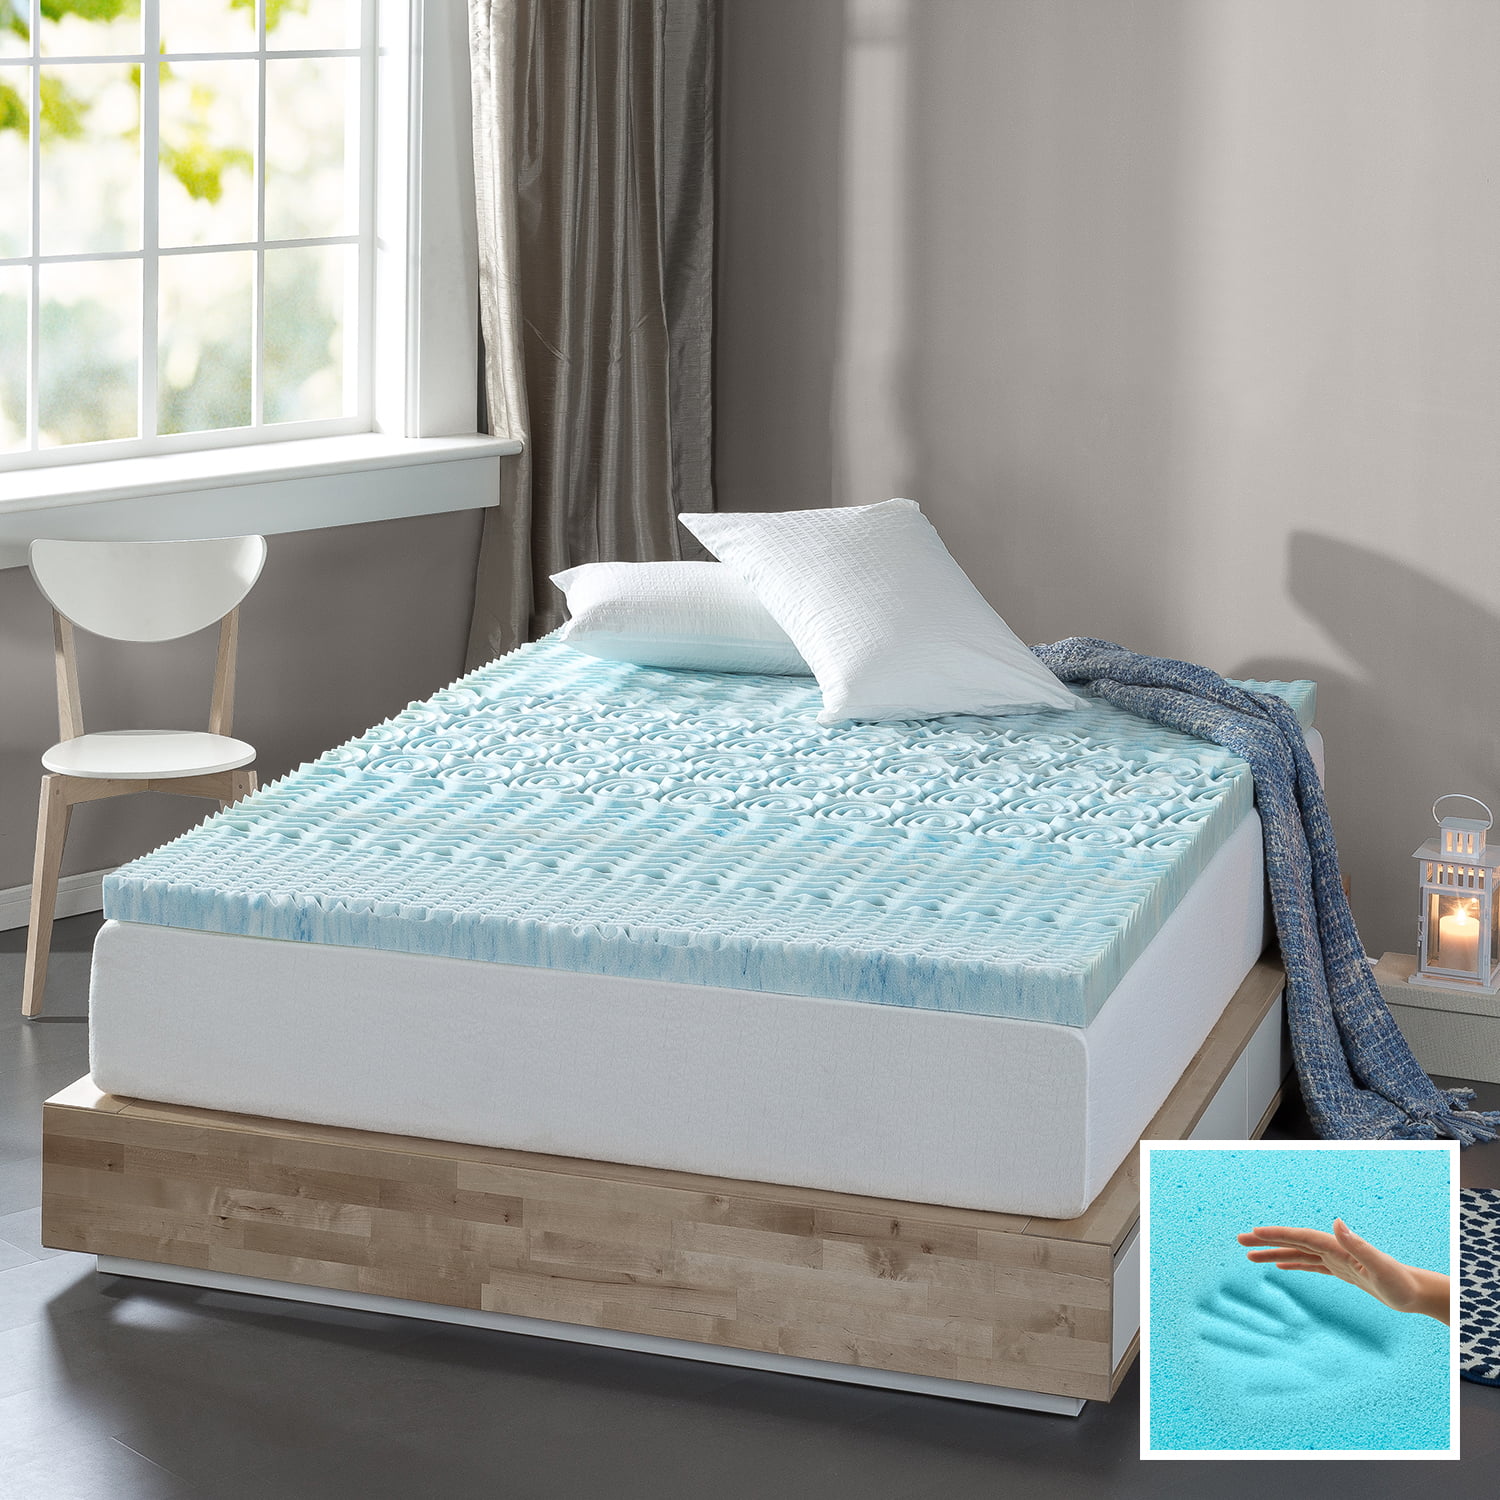 Orthopedic Foam Mattress Topper 3 In Cooling Spa 5-Zone Comfort Bed Body Support